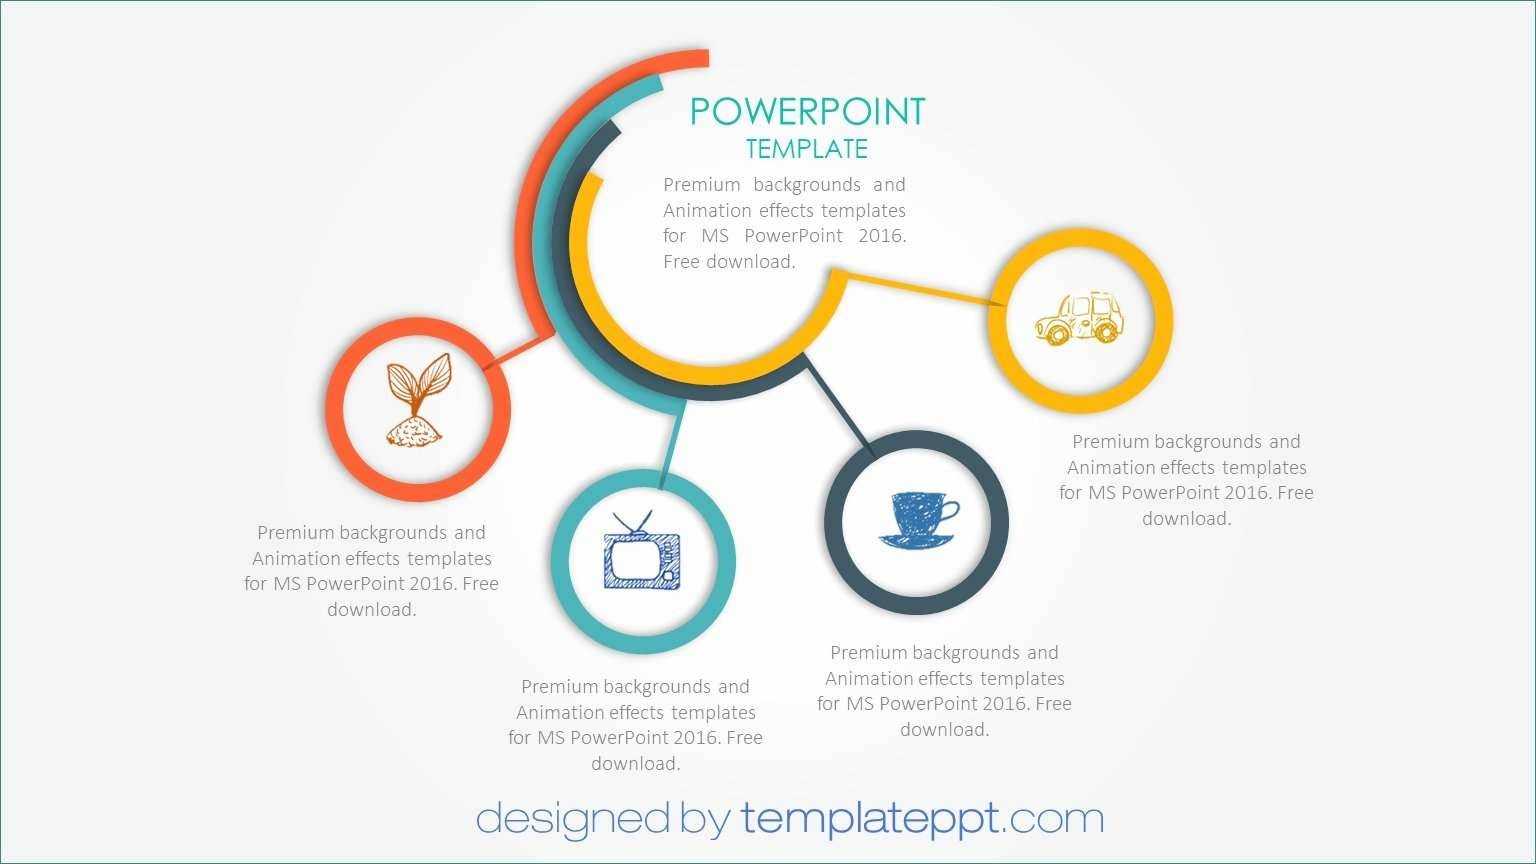 026 Powerpoint Animated Templates Free Download Template Regarding Powerpoint Animated Templates Free Download 2010